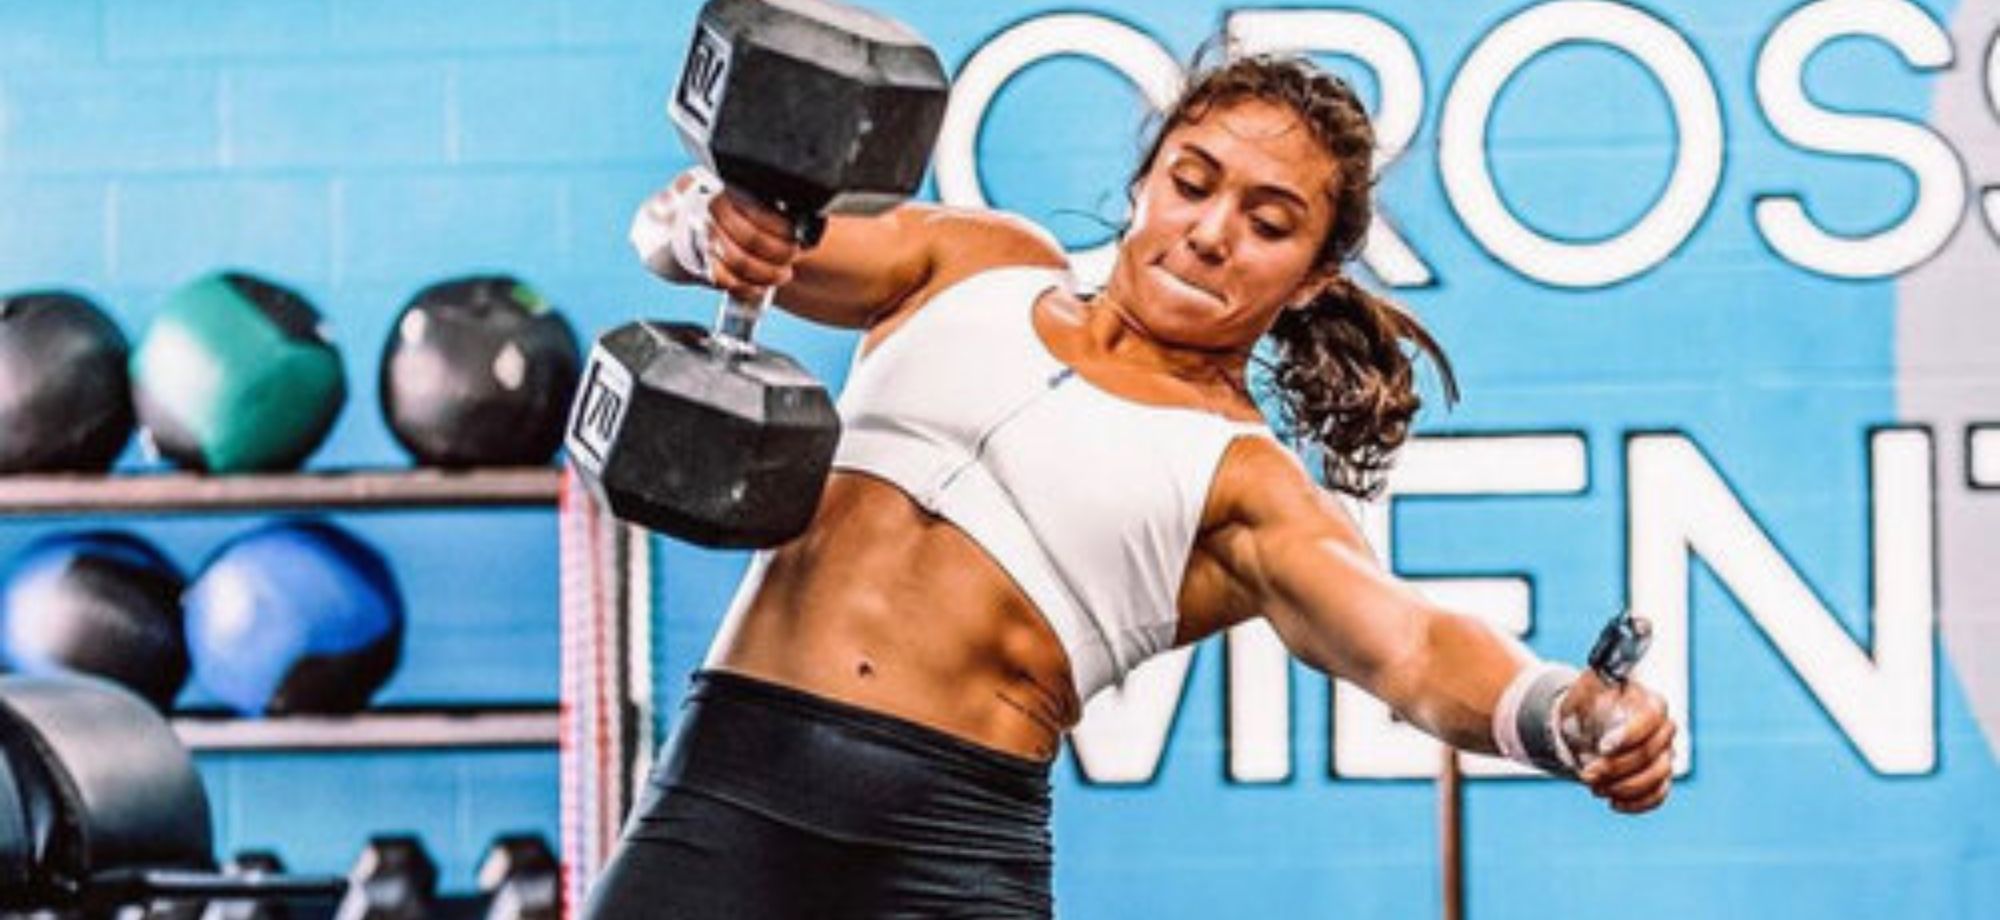 CrossFit Games Athlete Fee Saghafi on Taking Things Personally